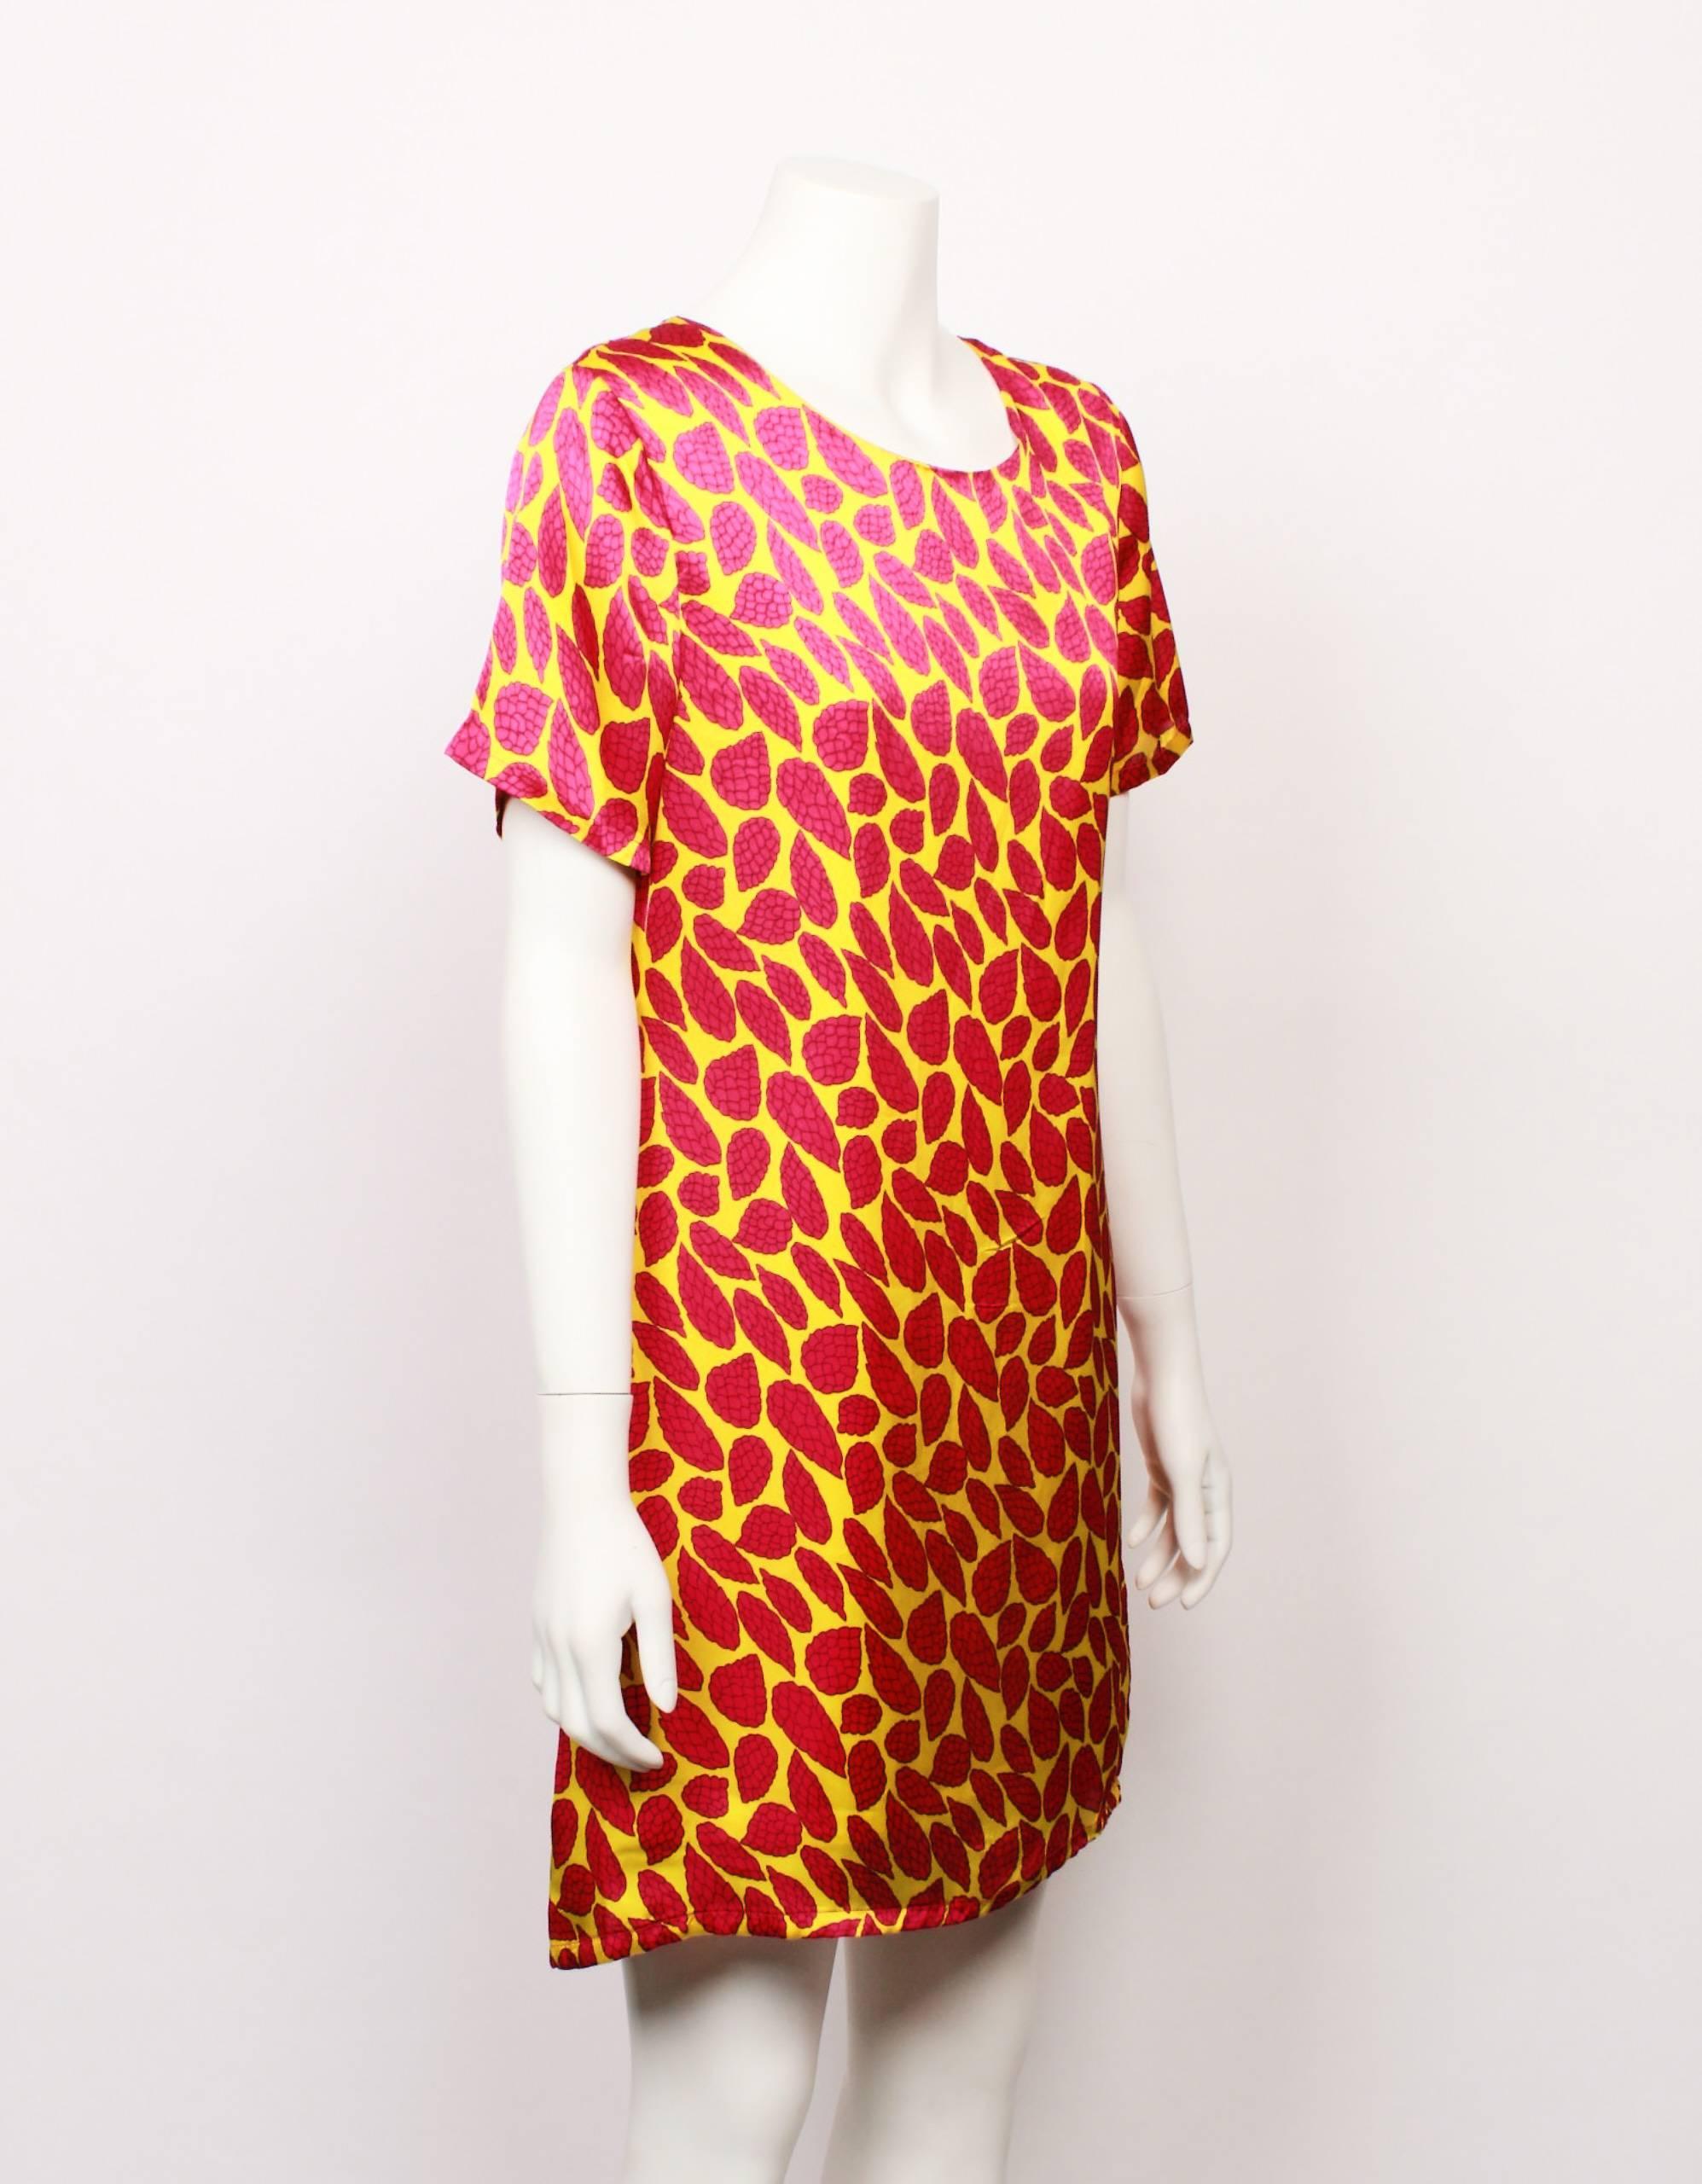  Love Moschino Printed Shift Dress In Good Condition For Sale In Melbourne, Victoria